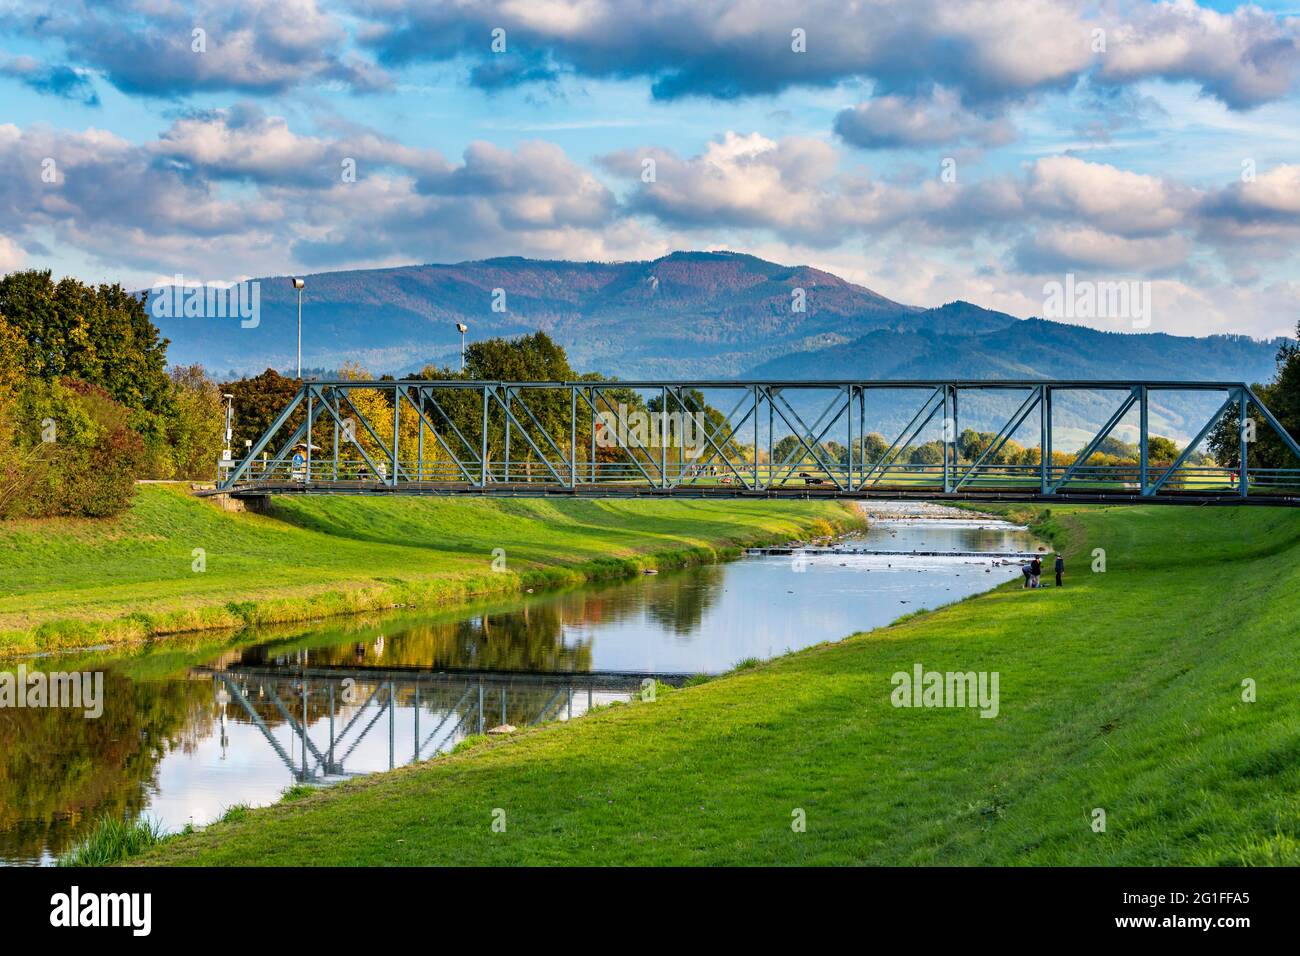 Bicycle bridge and Kandel mountain in the background, Emmendingen, Baden-Wuerttemberg, Germany Stock Photo